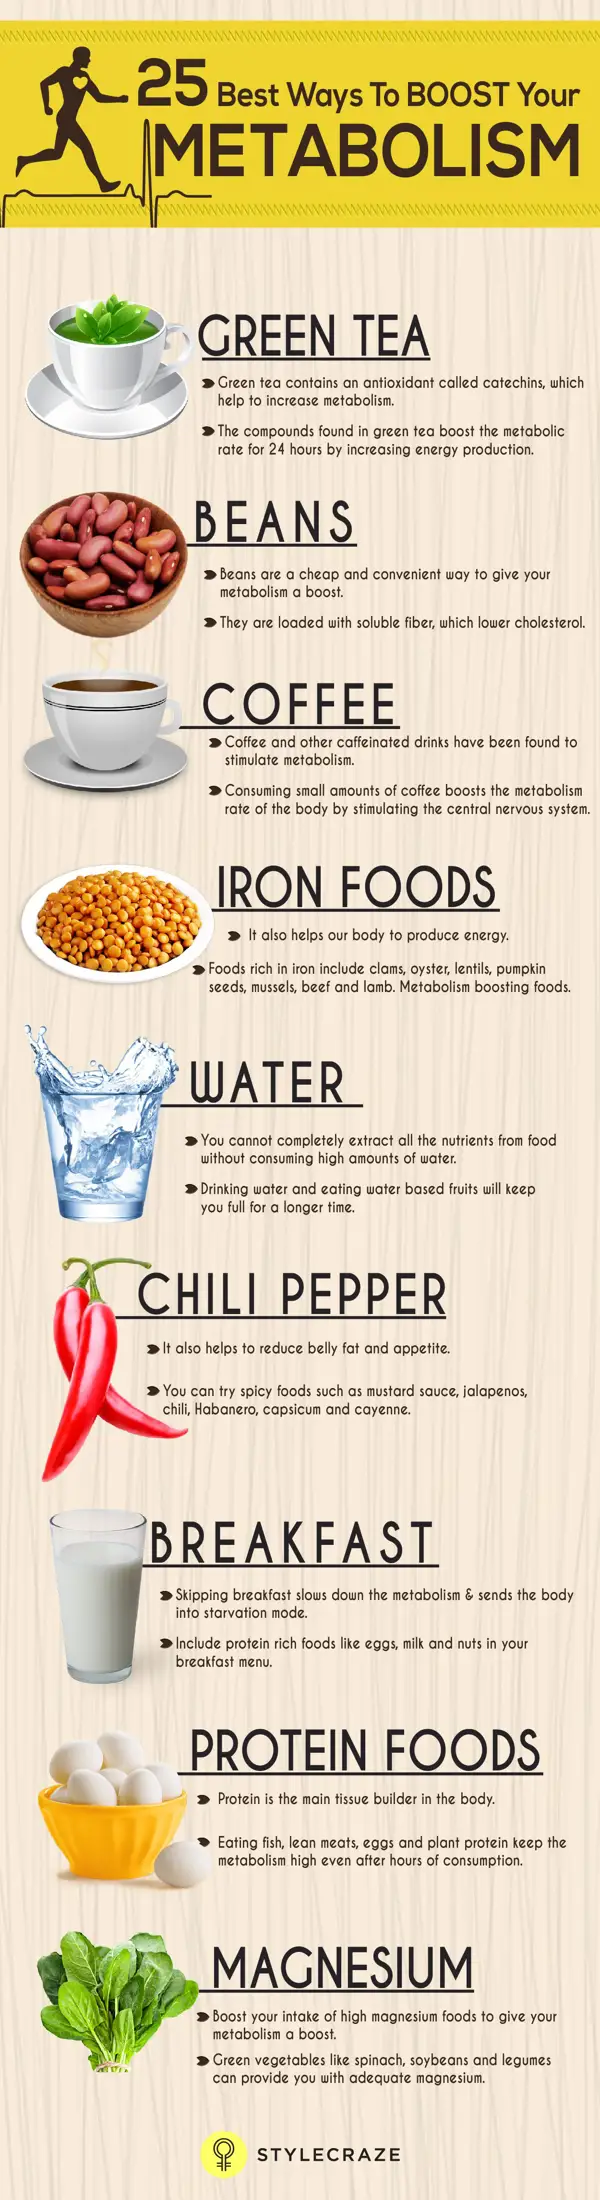 Eat Protein-Rich Foods